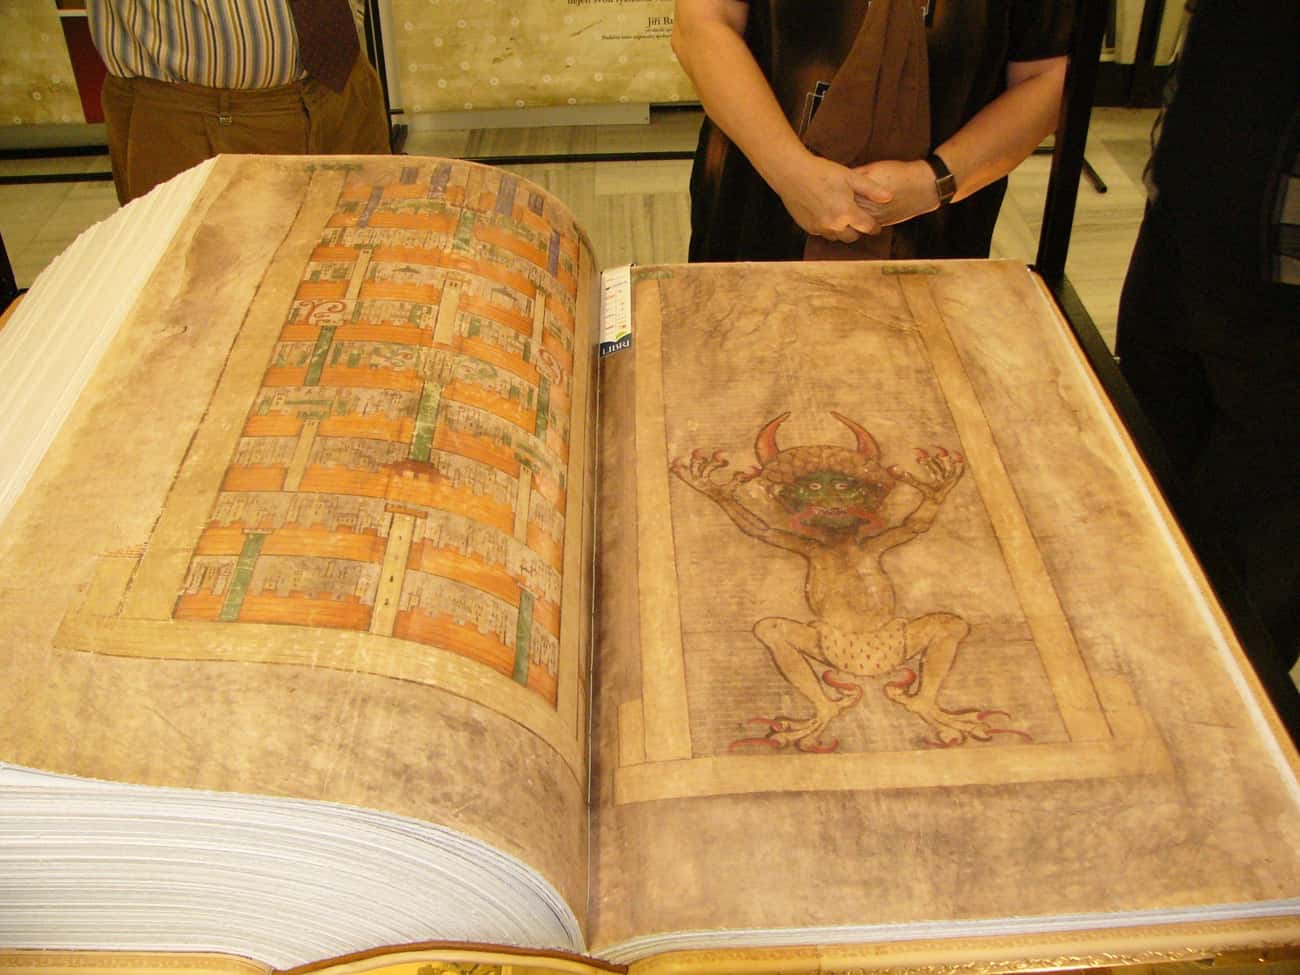 The Codex Contains The Christian Bible, But Also Magic Spells And Ritual Instructions